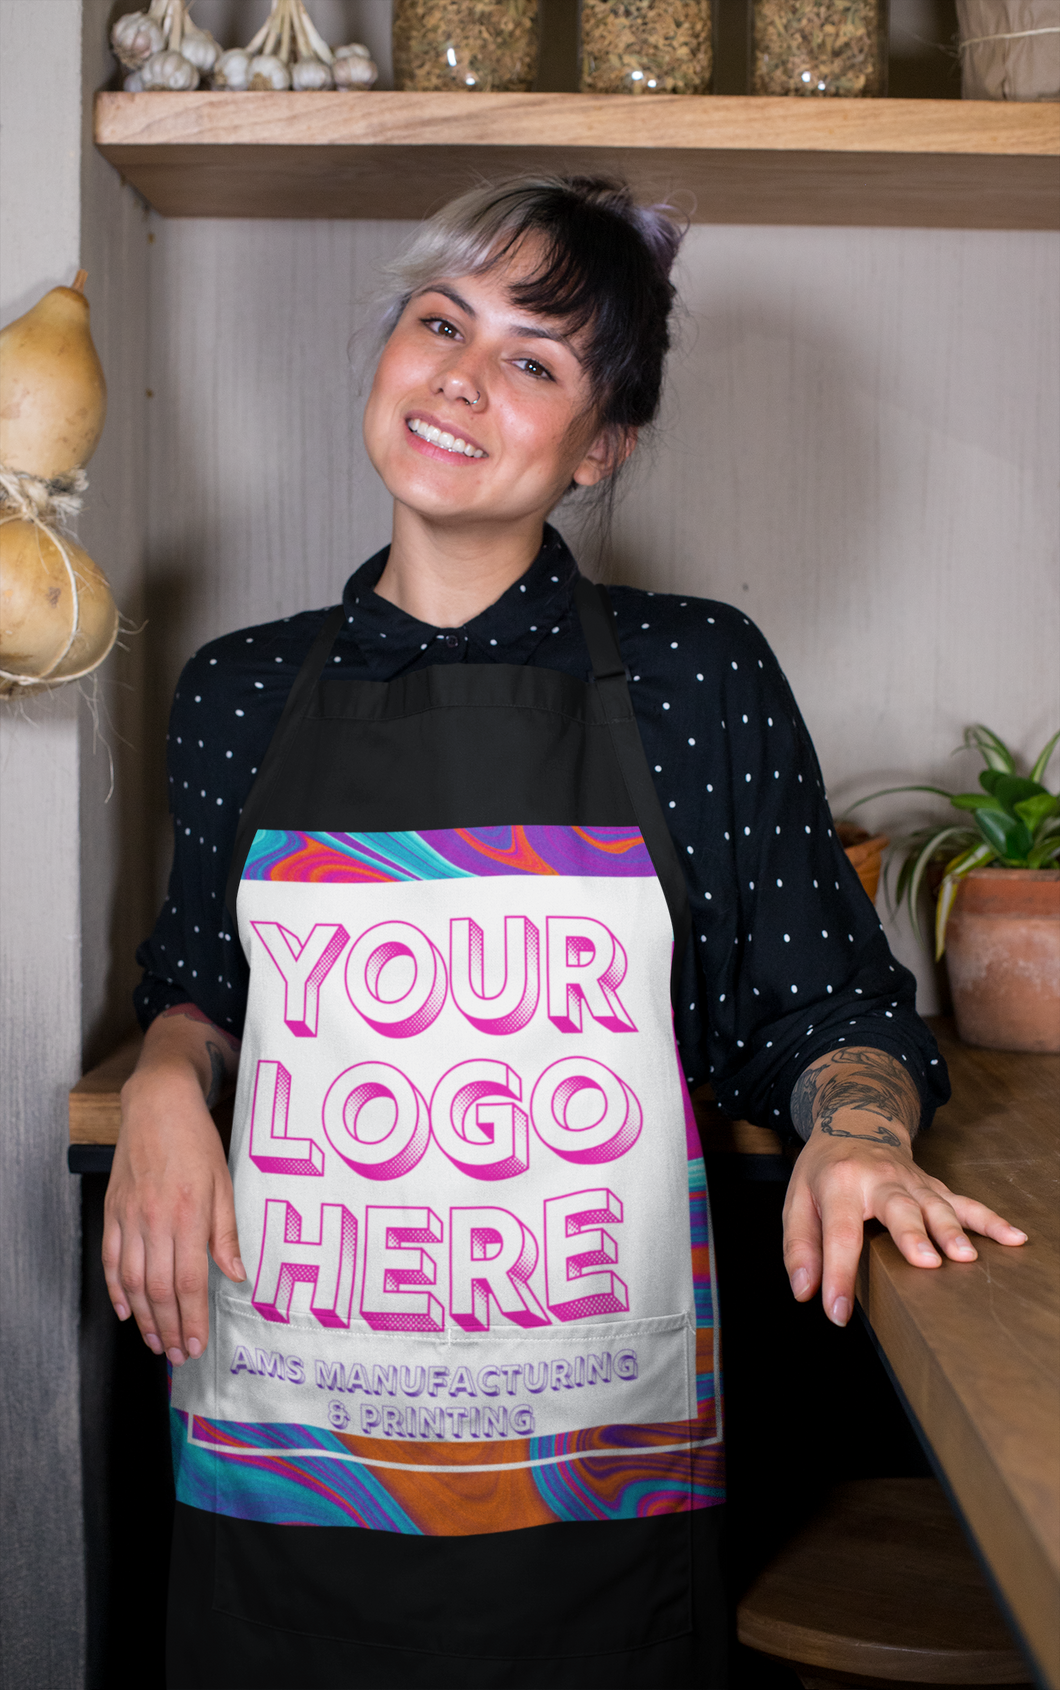 Chef's Apron - AMS Manufacturing and Printing